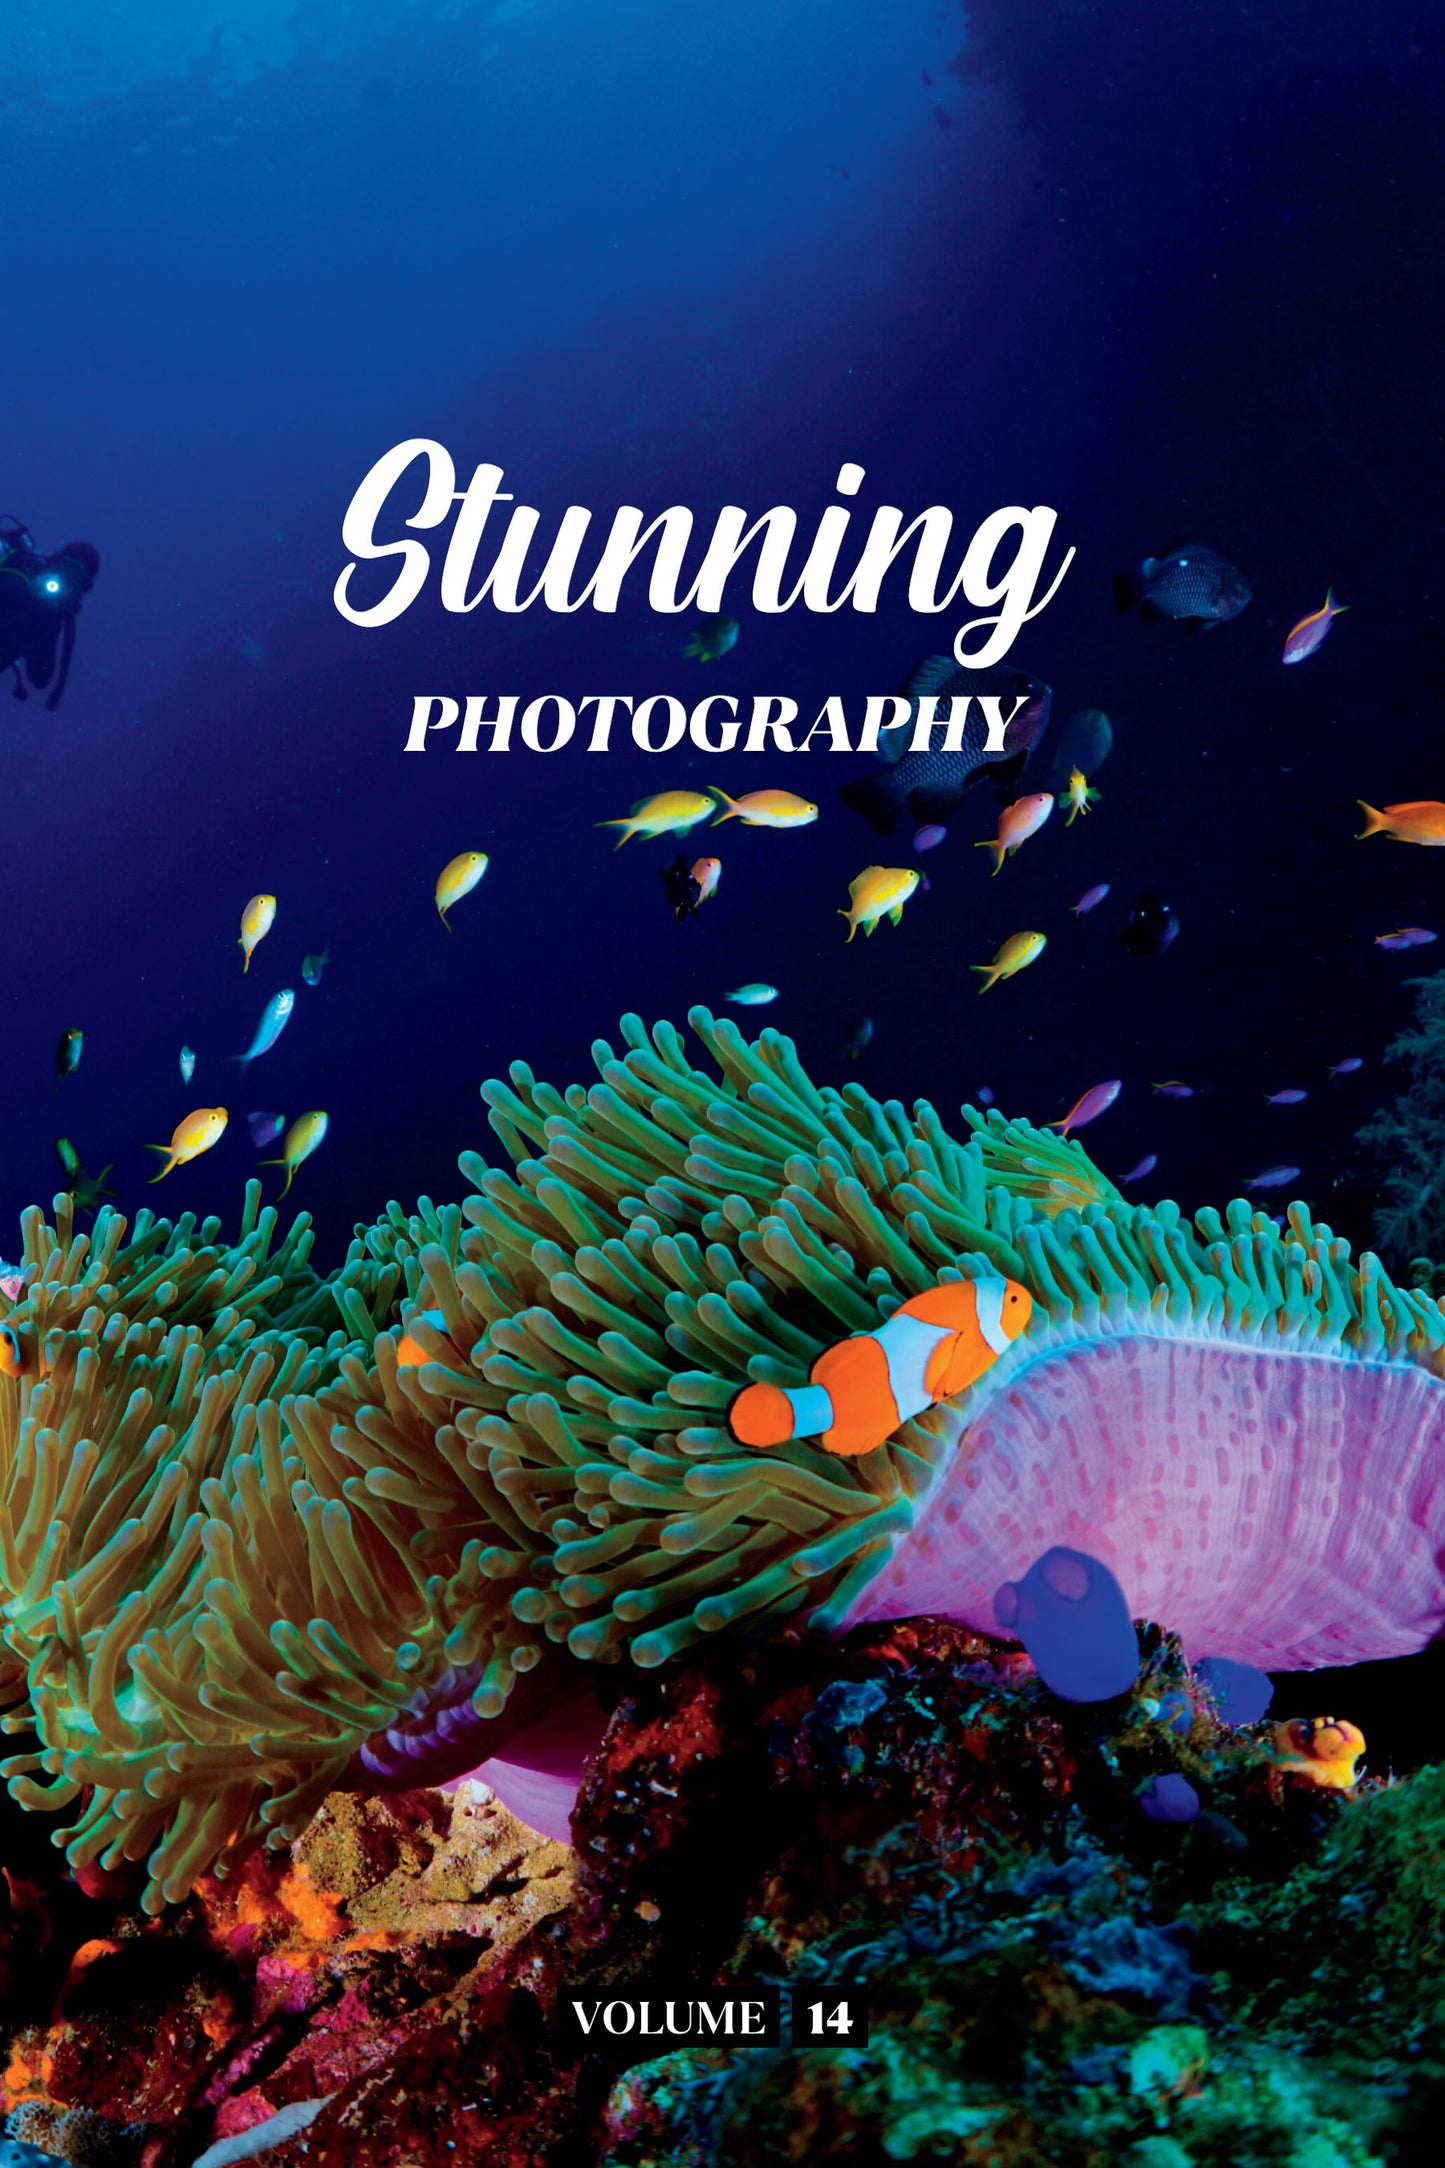 Stunning Photography Volume 14 (Physical Book)